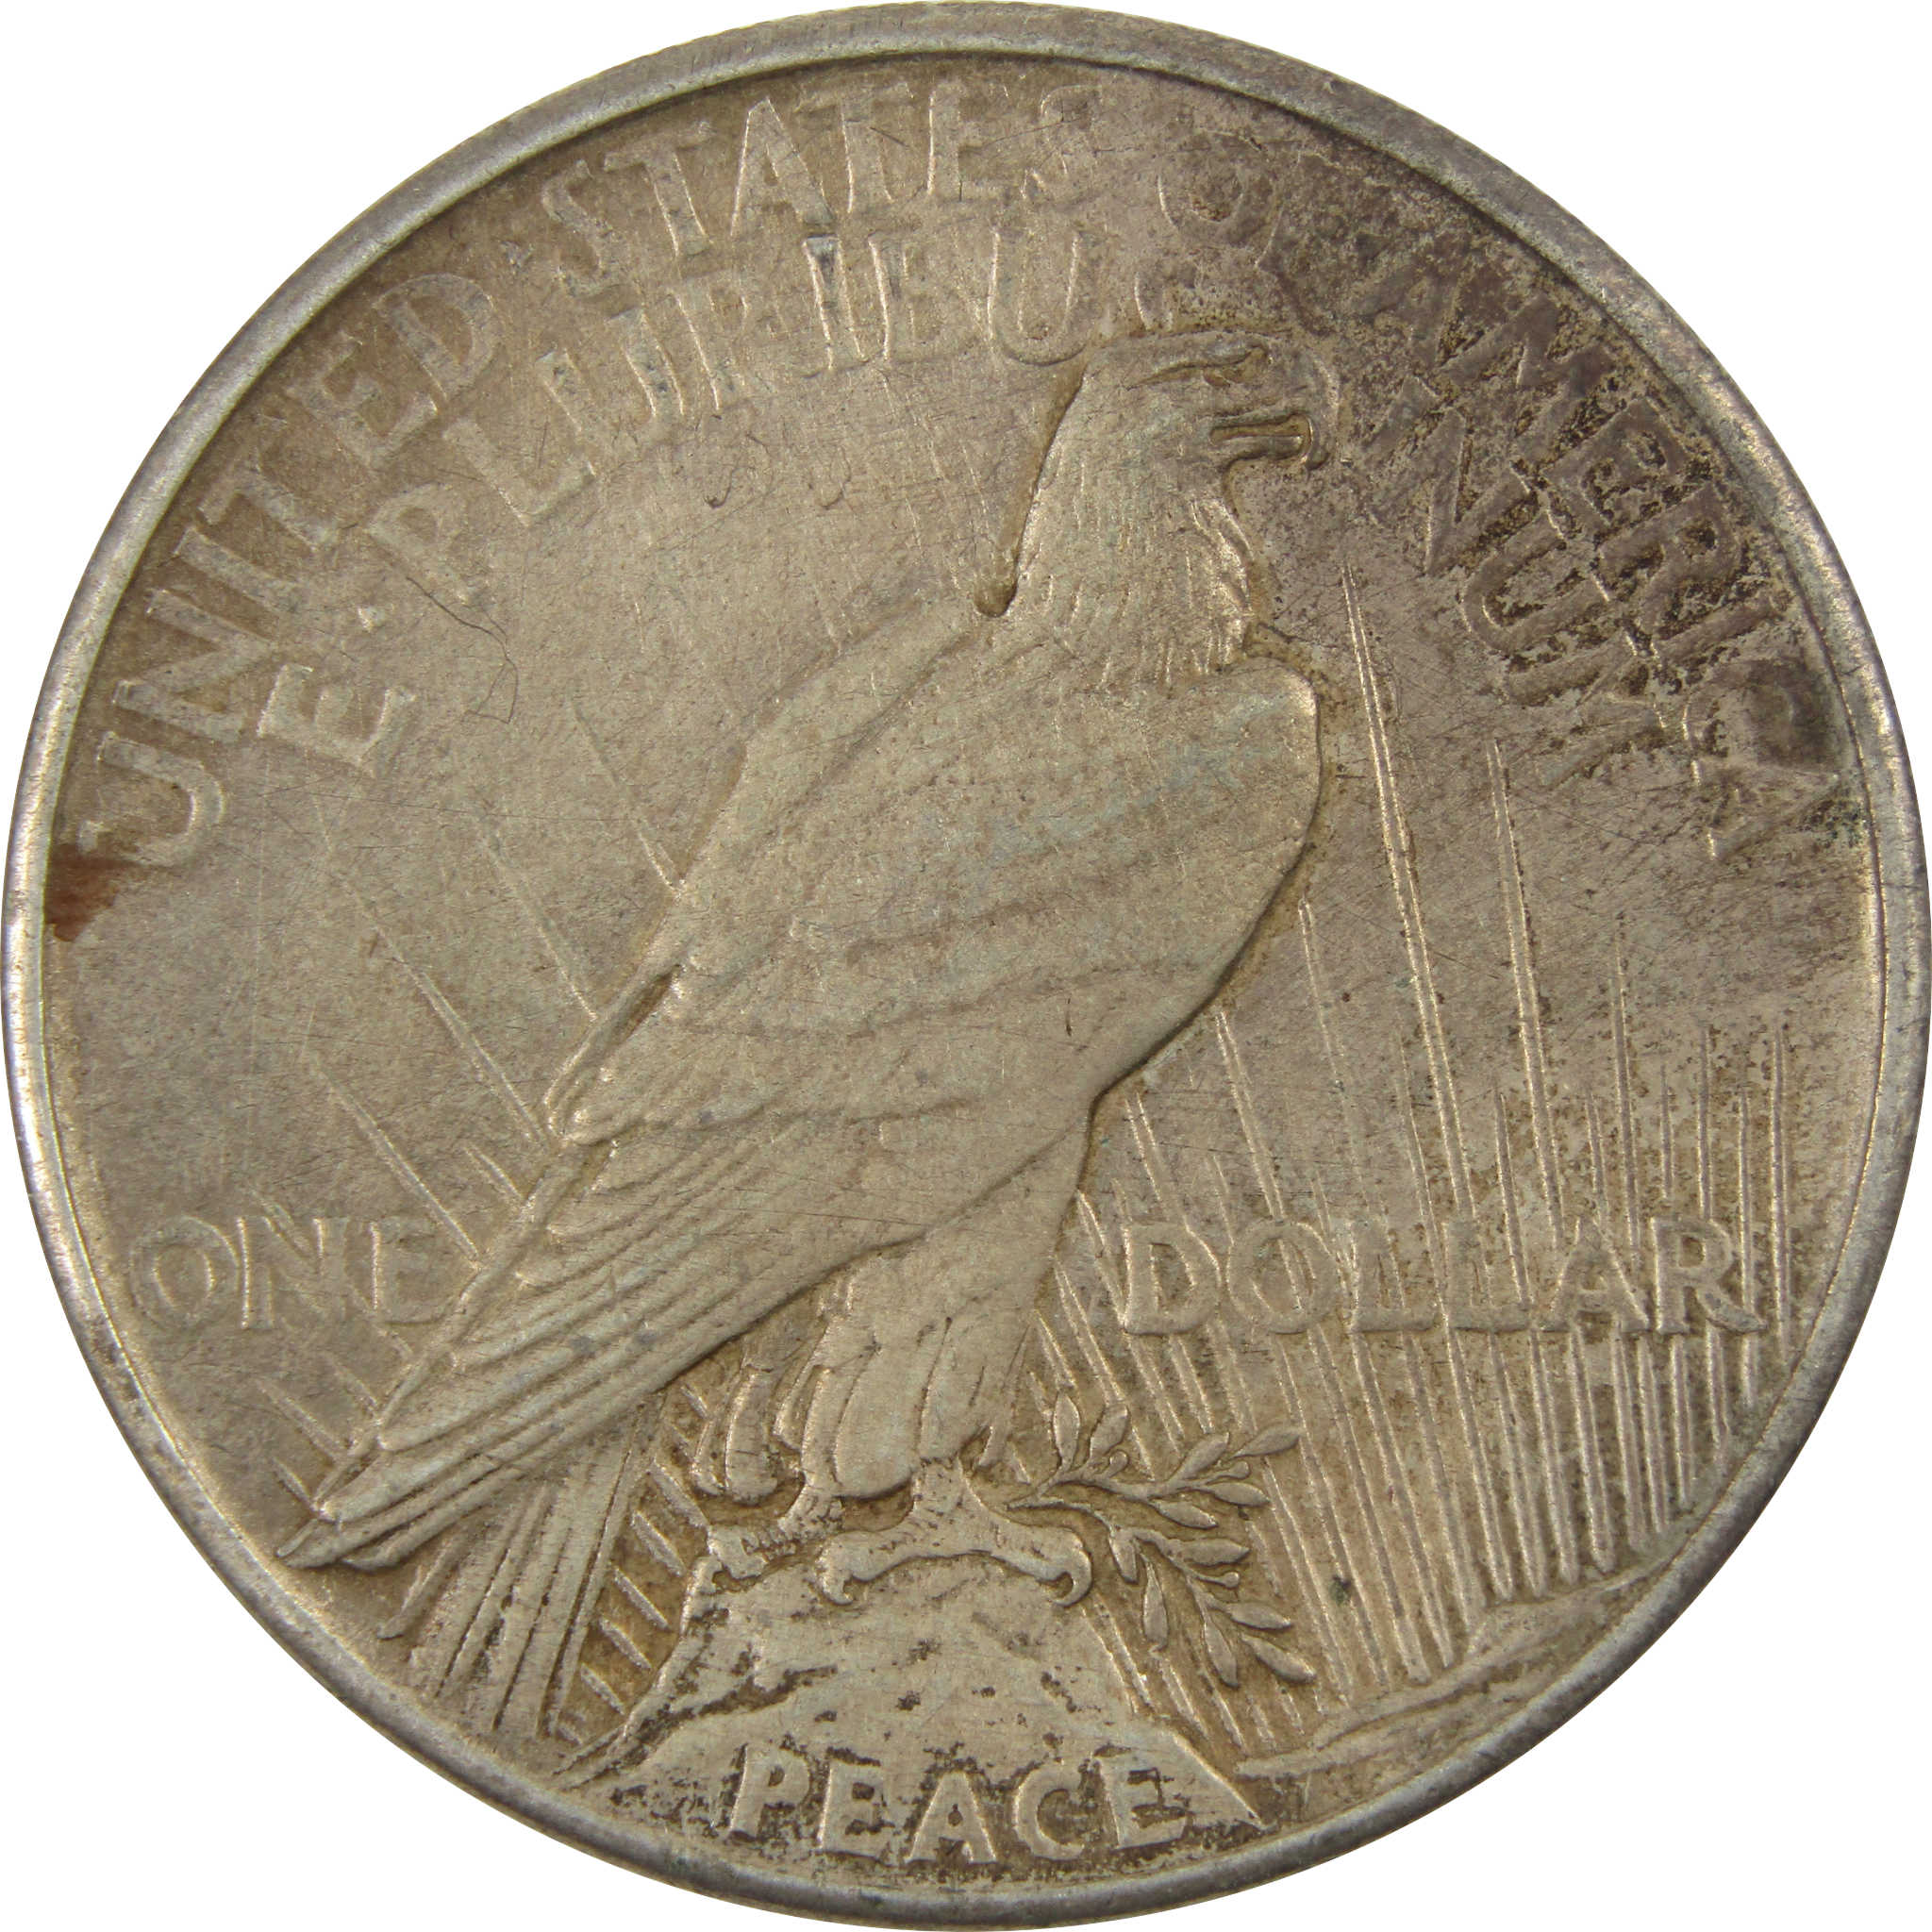 1921 High Relief Peace Dollar XF Details 90% Silver $1 Coin SKU:I4372